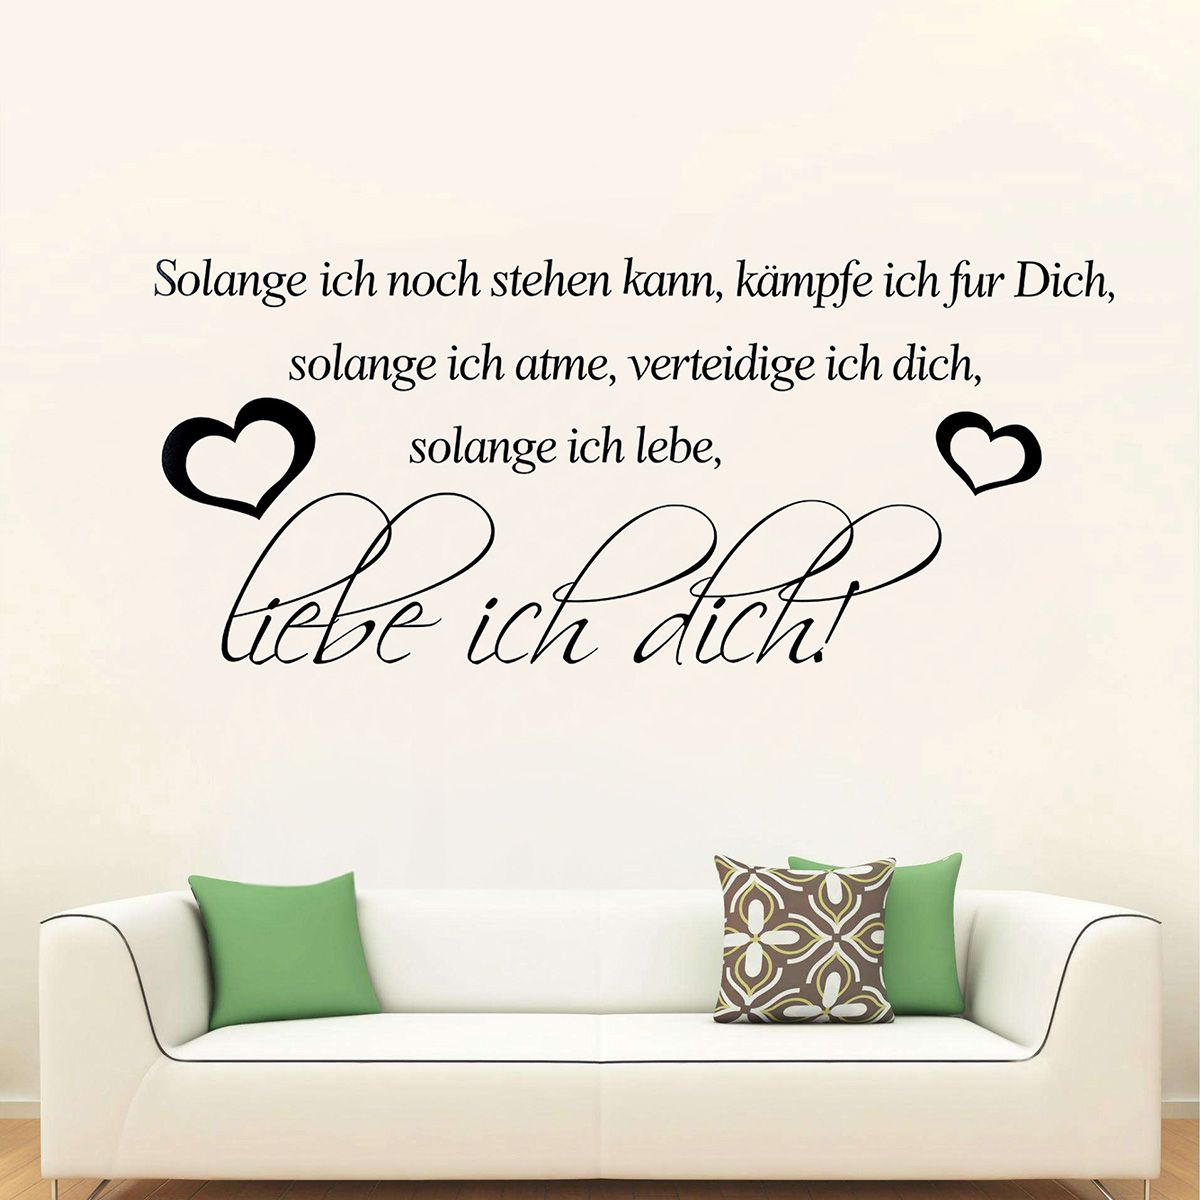 PVC-Wall-Sticker-Quotes-Decals-Stickers-Living-Study-Bedroom-Art-Home-Room-Decor-1515472